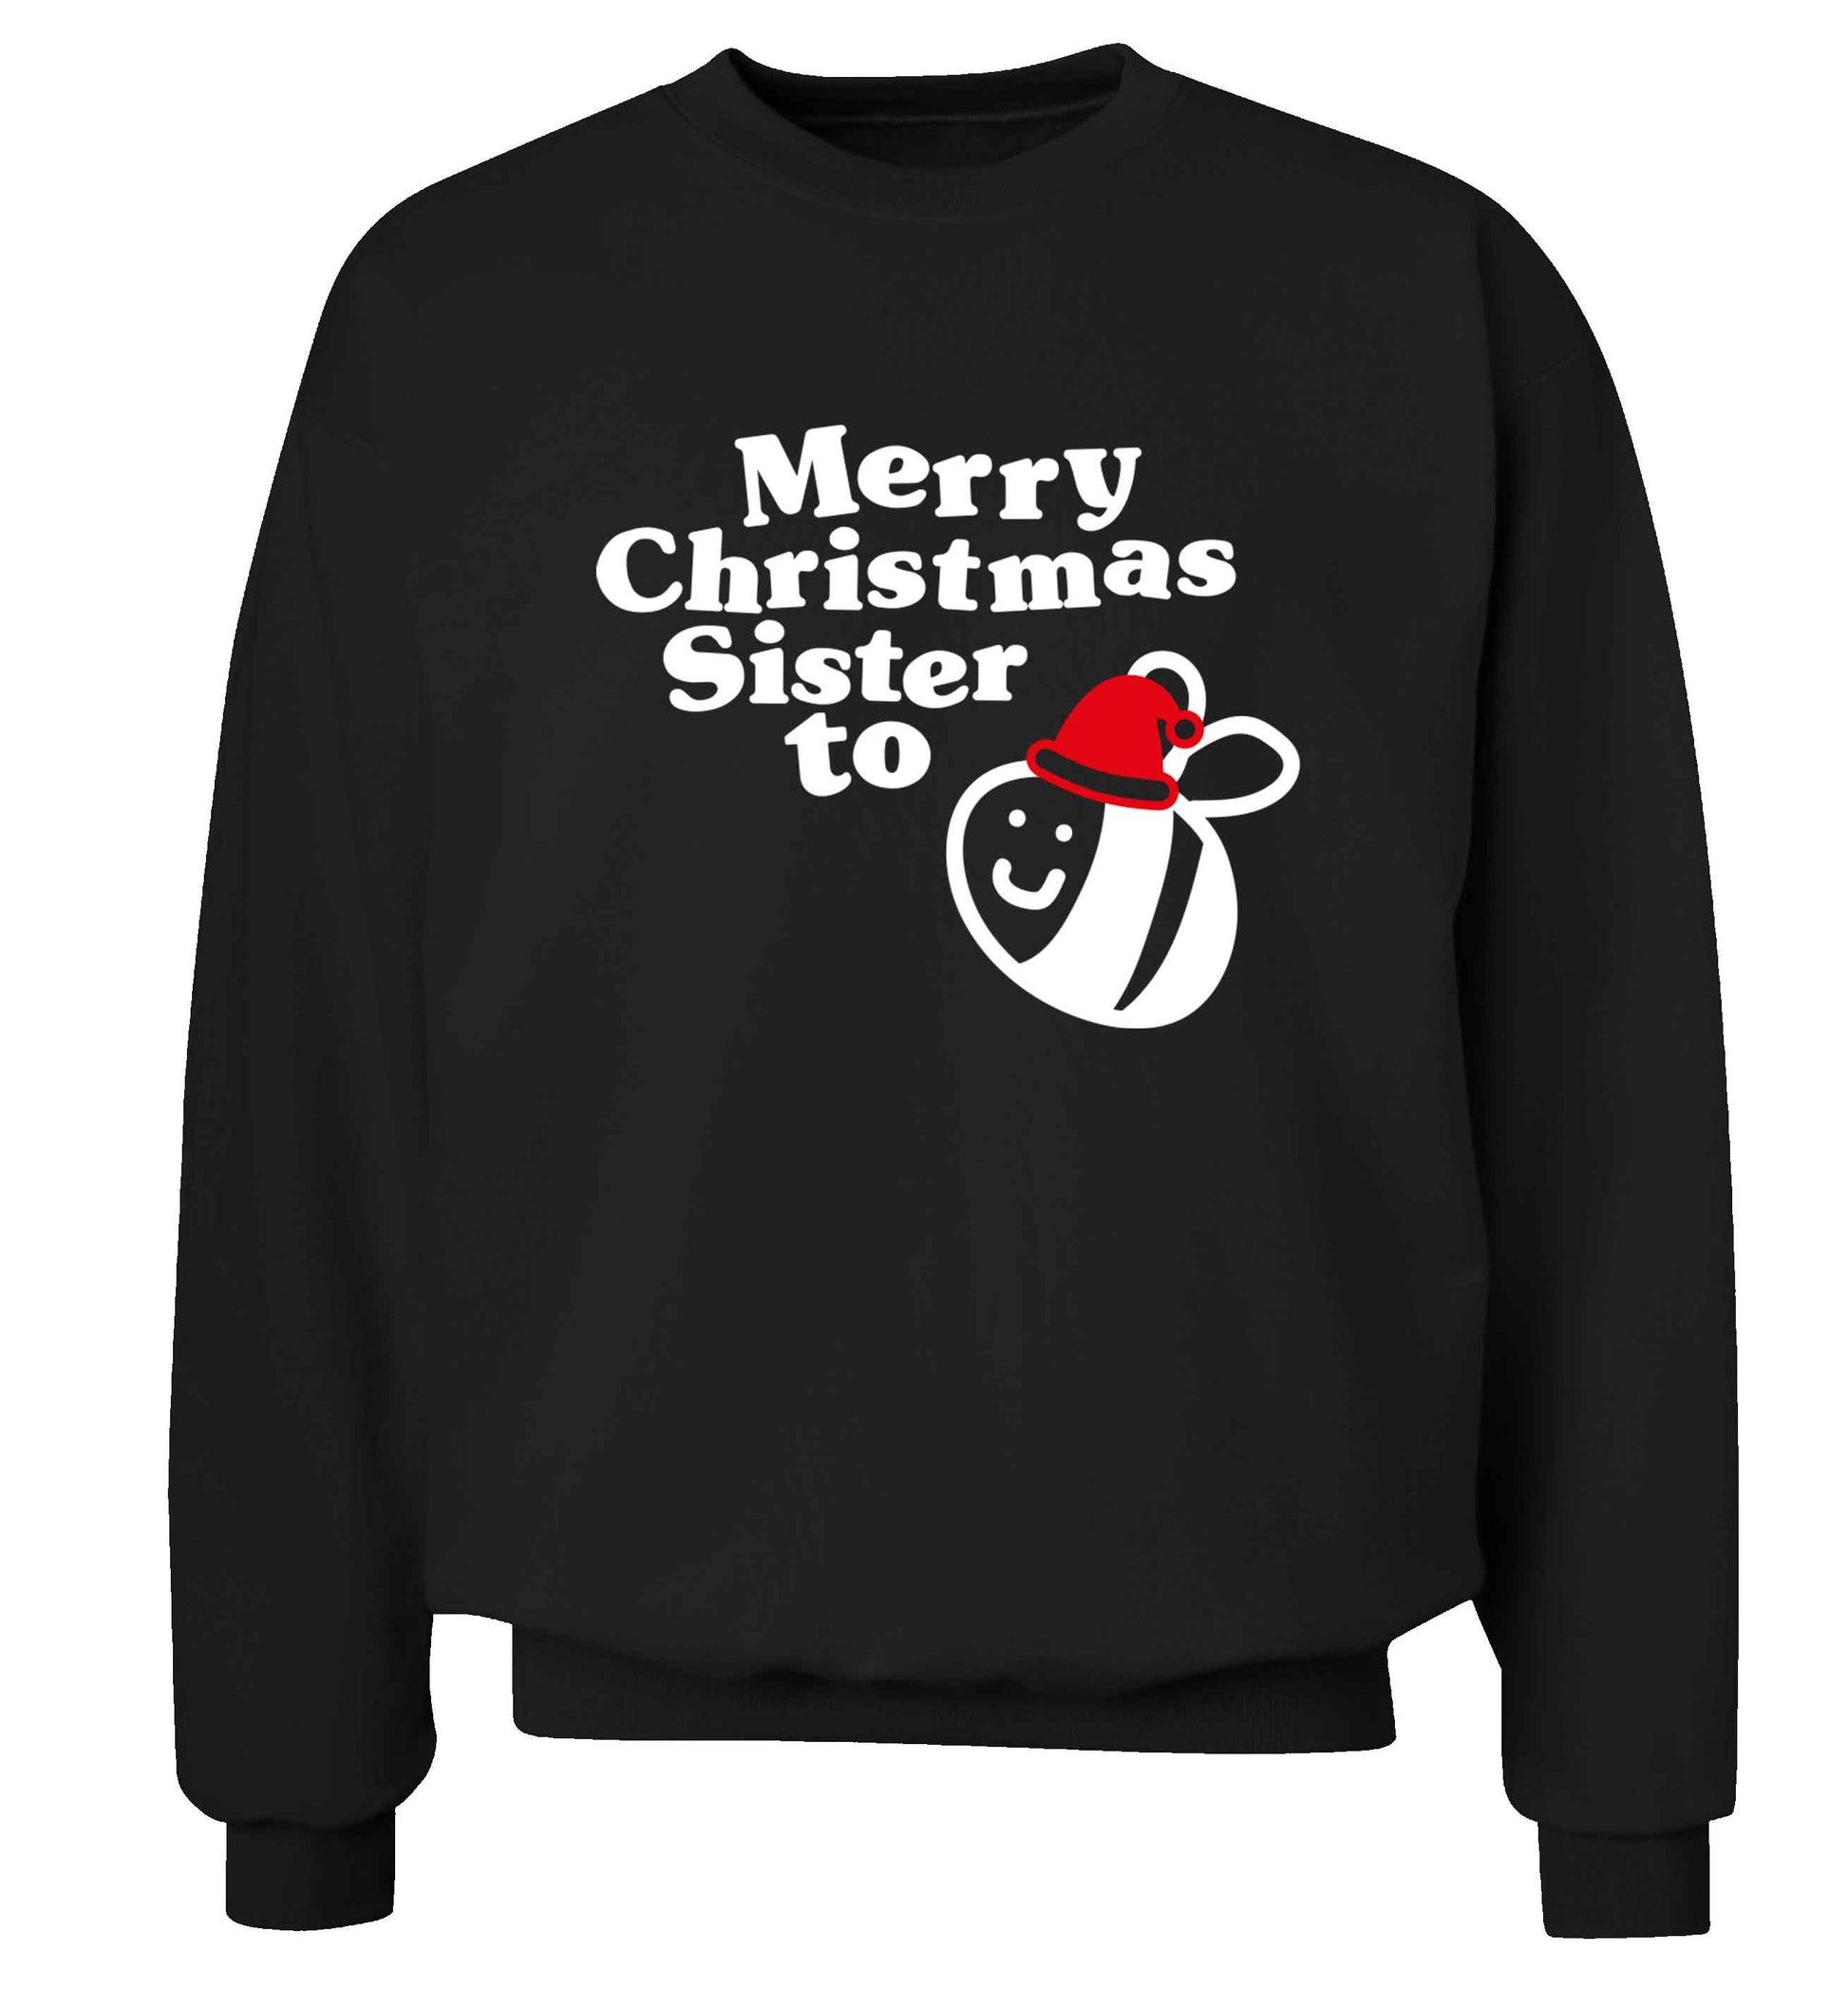 Merry Christmas sister to be Adult's unisex black Sweater 2XL